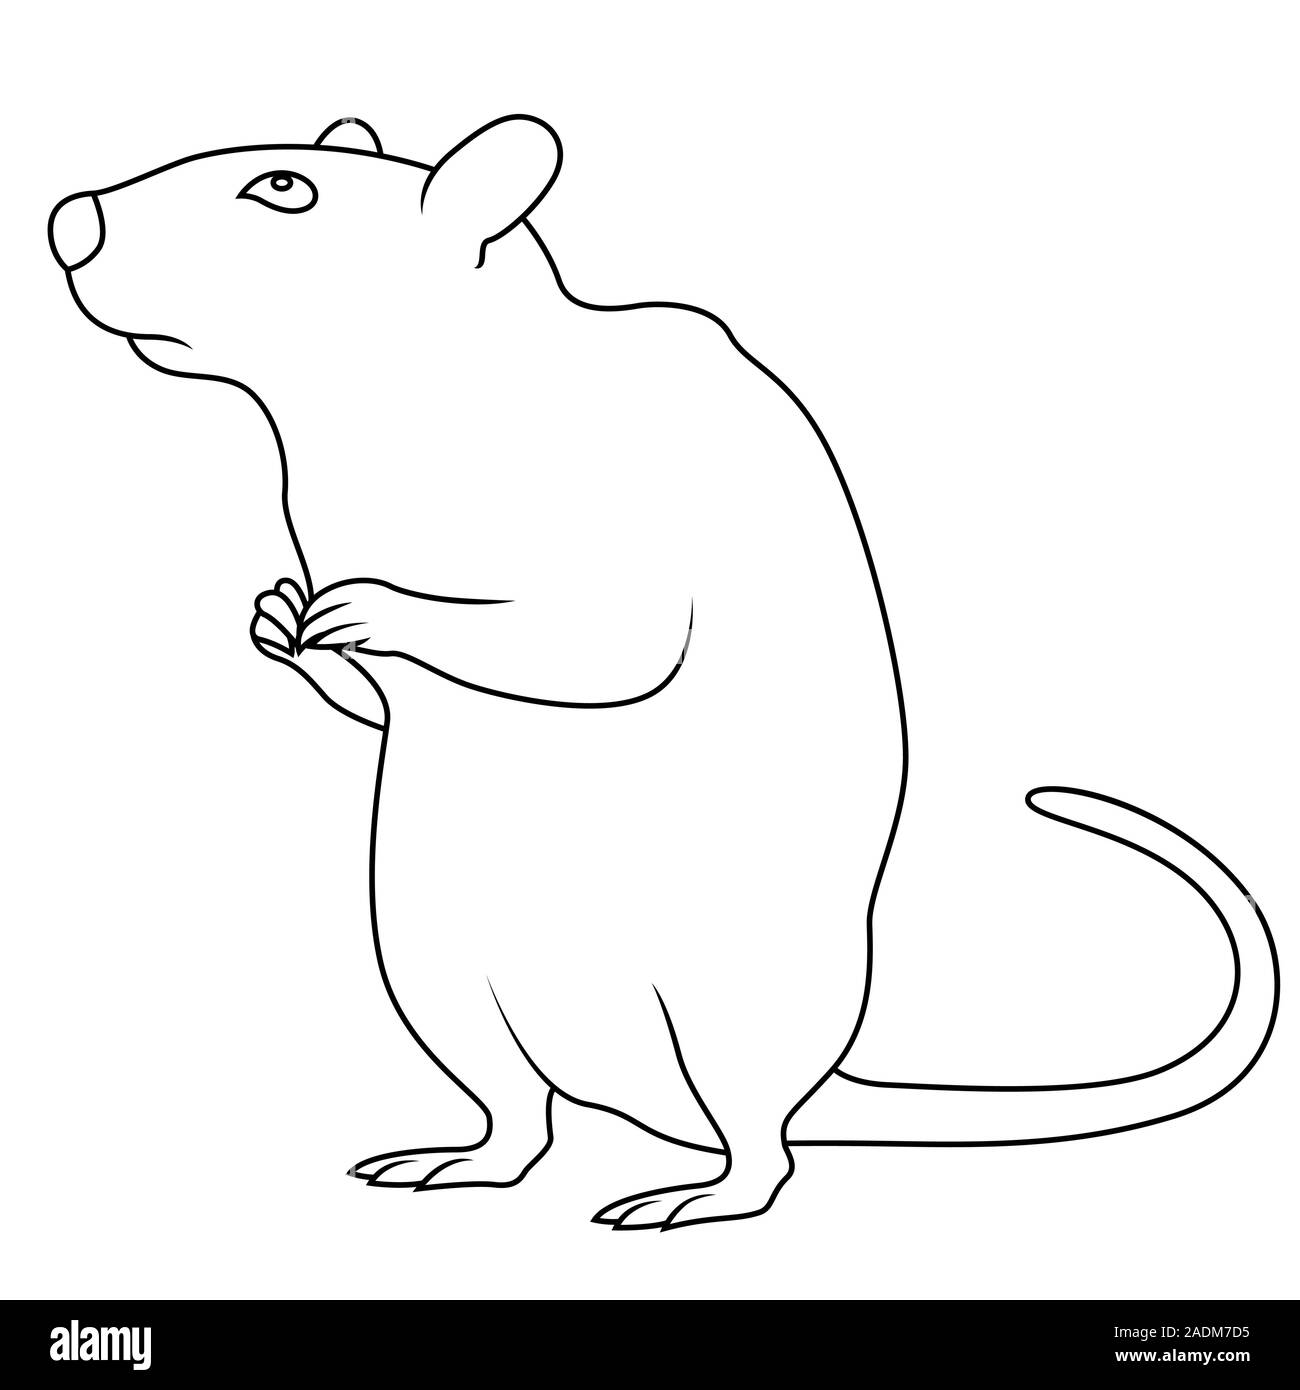 Black outline of Sign Rat, symbol of New Year, hand drawn illustration isolated on a white background Stock Vector